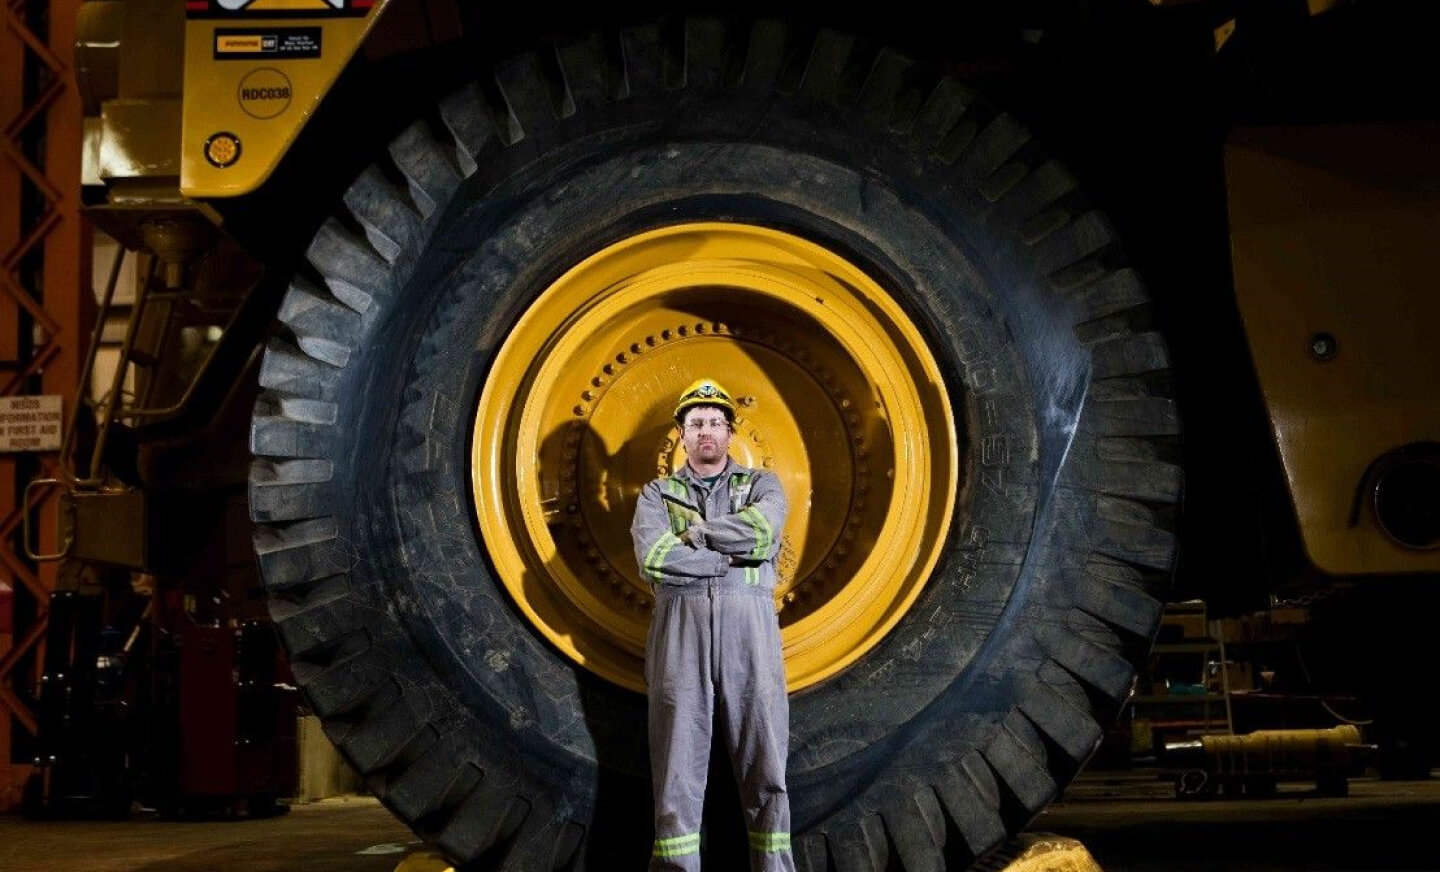 The tire size of the 797 is over 13 ft in diameter